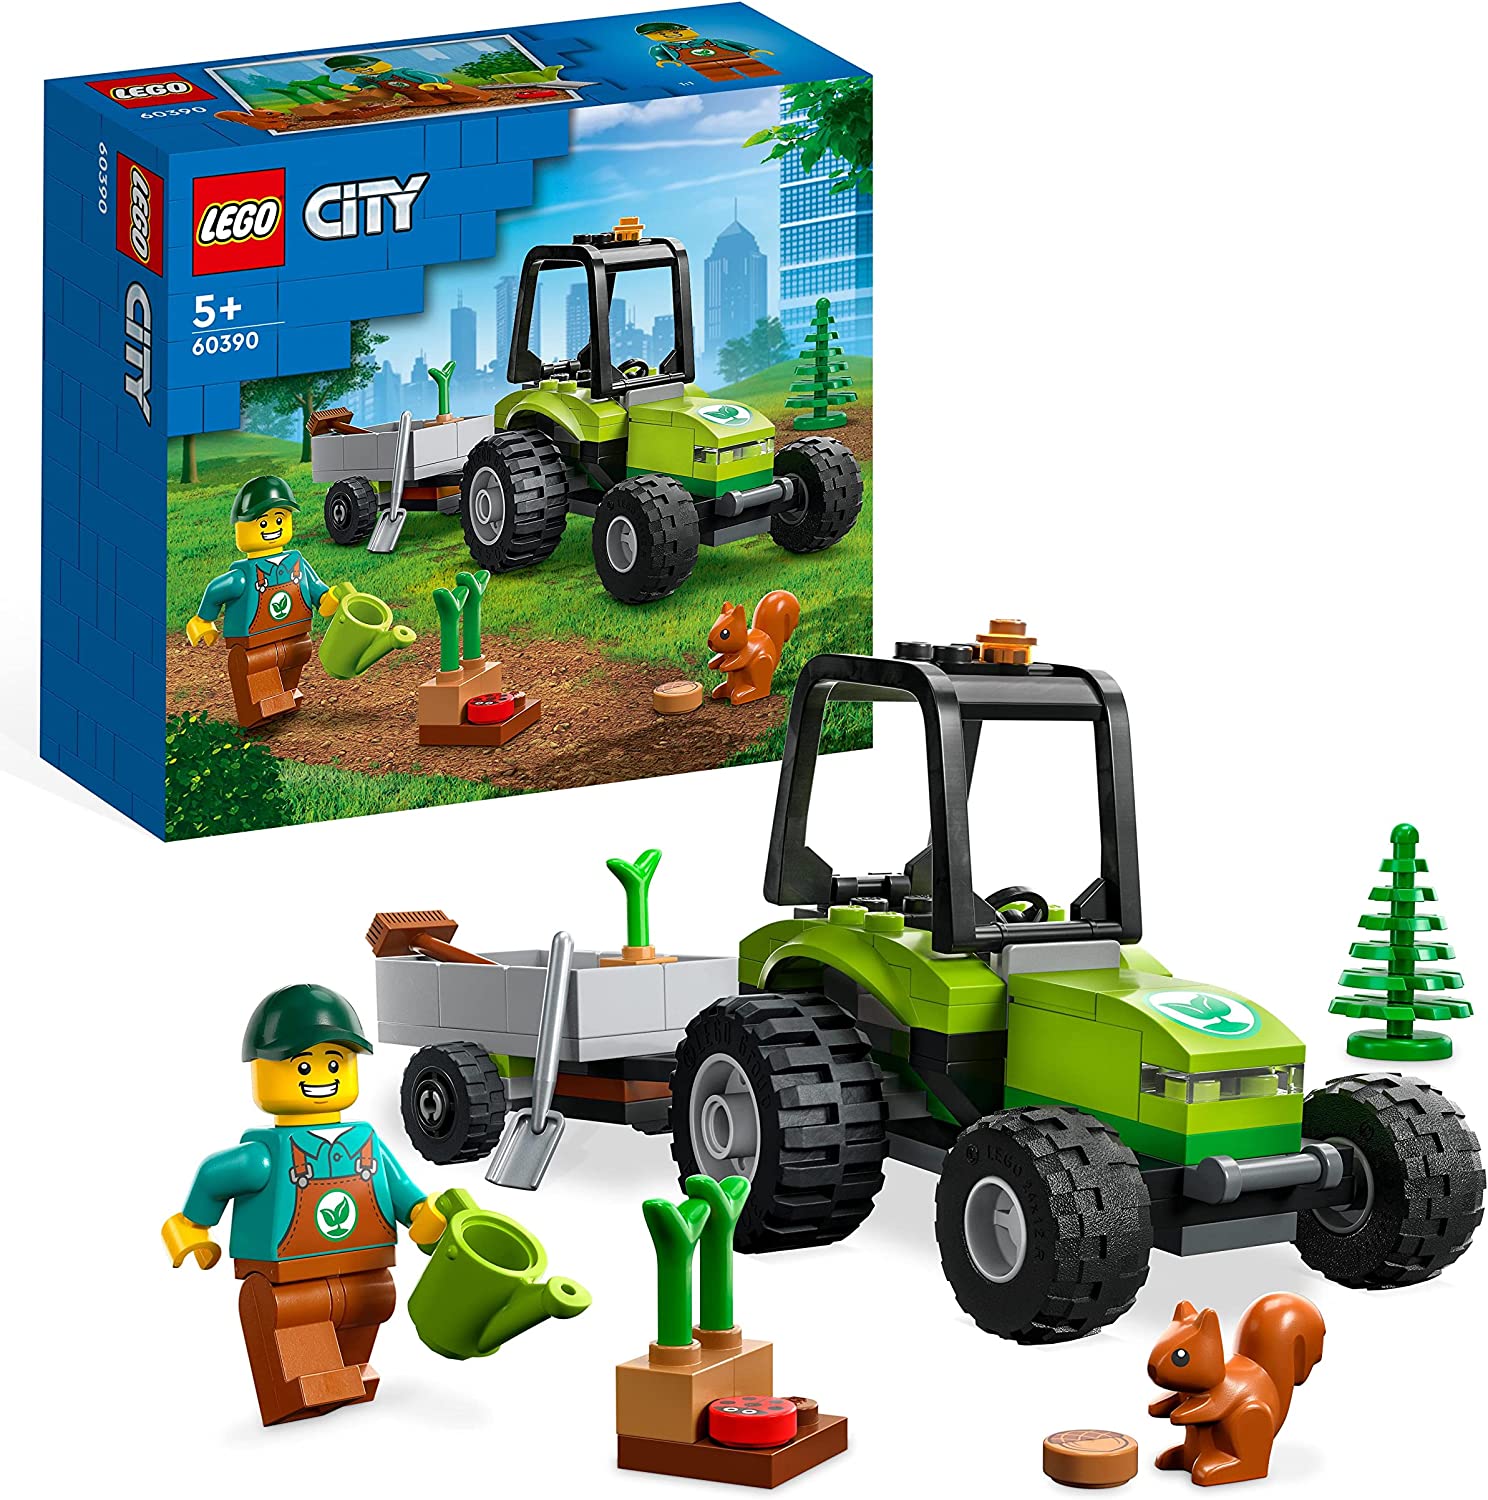 LEGO 60390 City Small Tractor, Toy Tractor with Trailer, Farm Vehicle Set with Gardener Mini Figure & Animal Figure, Construction Toy from 5 Years